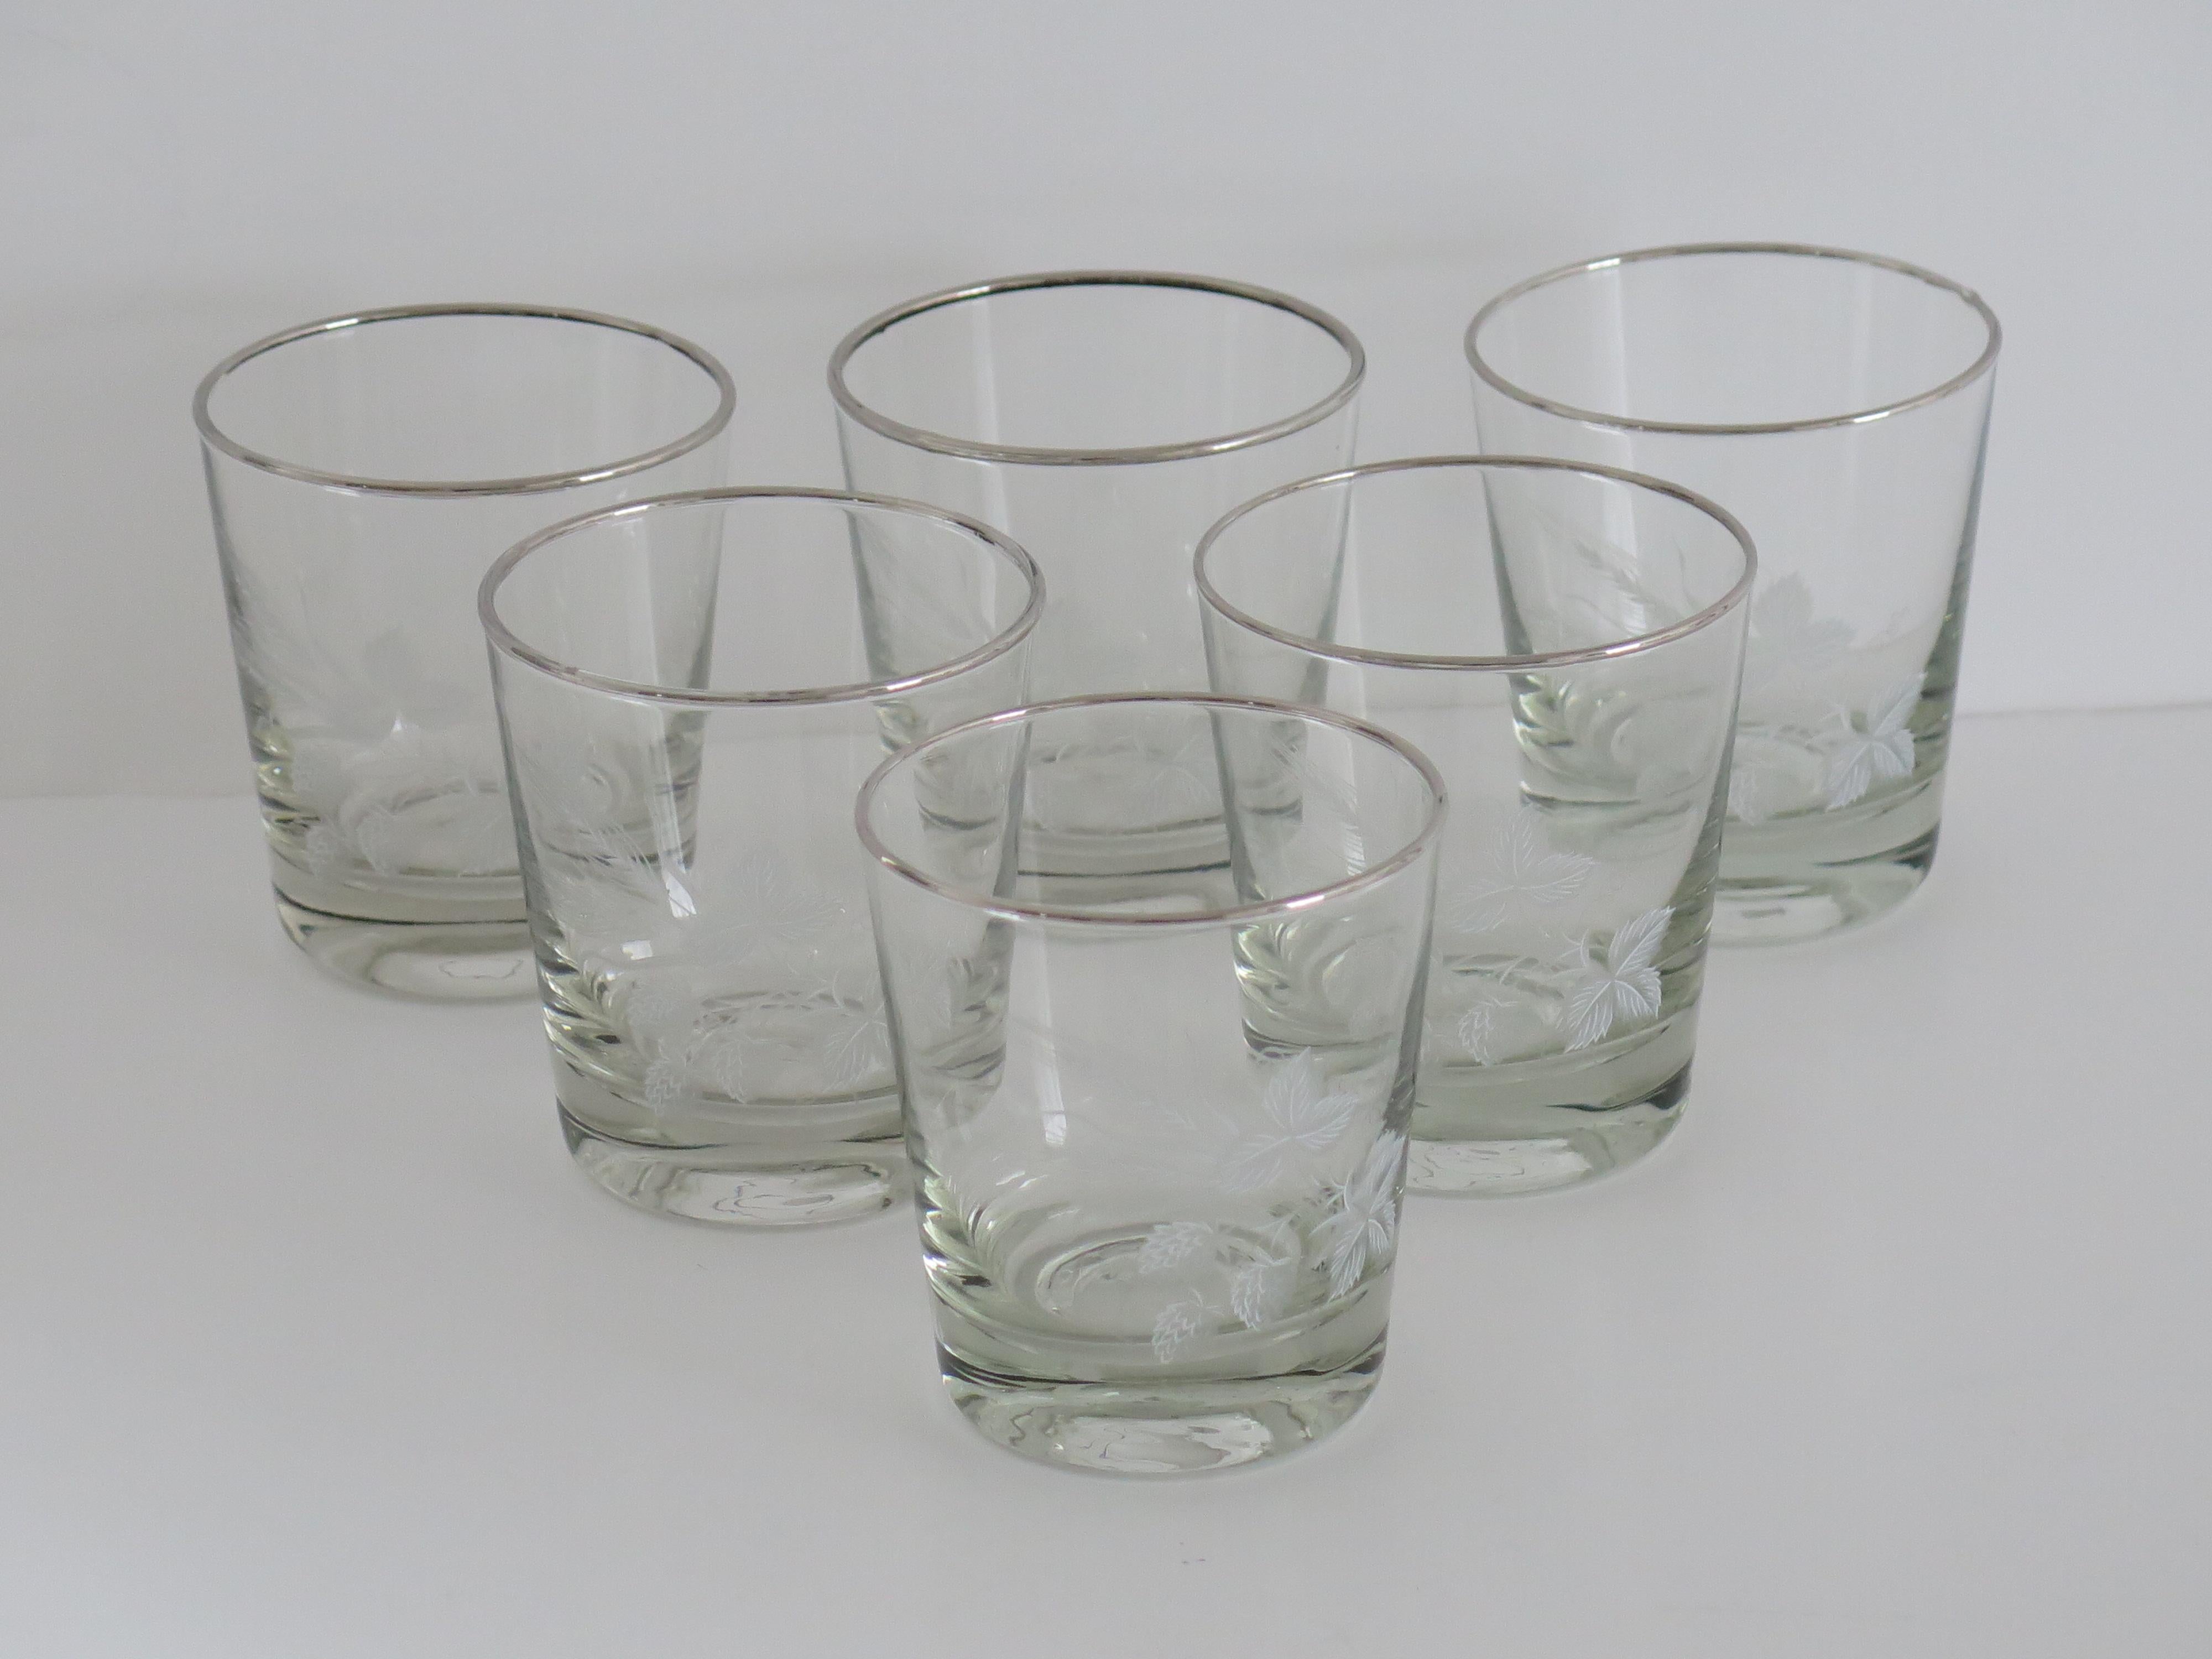 English Set of SIX Whisky Drinking Glasses Barley Decoration & Silver Rim, circa 1950s For Sale